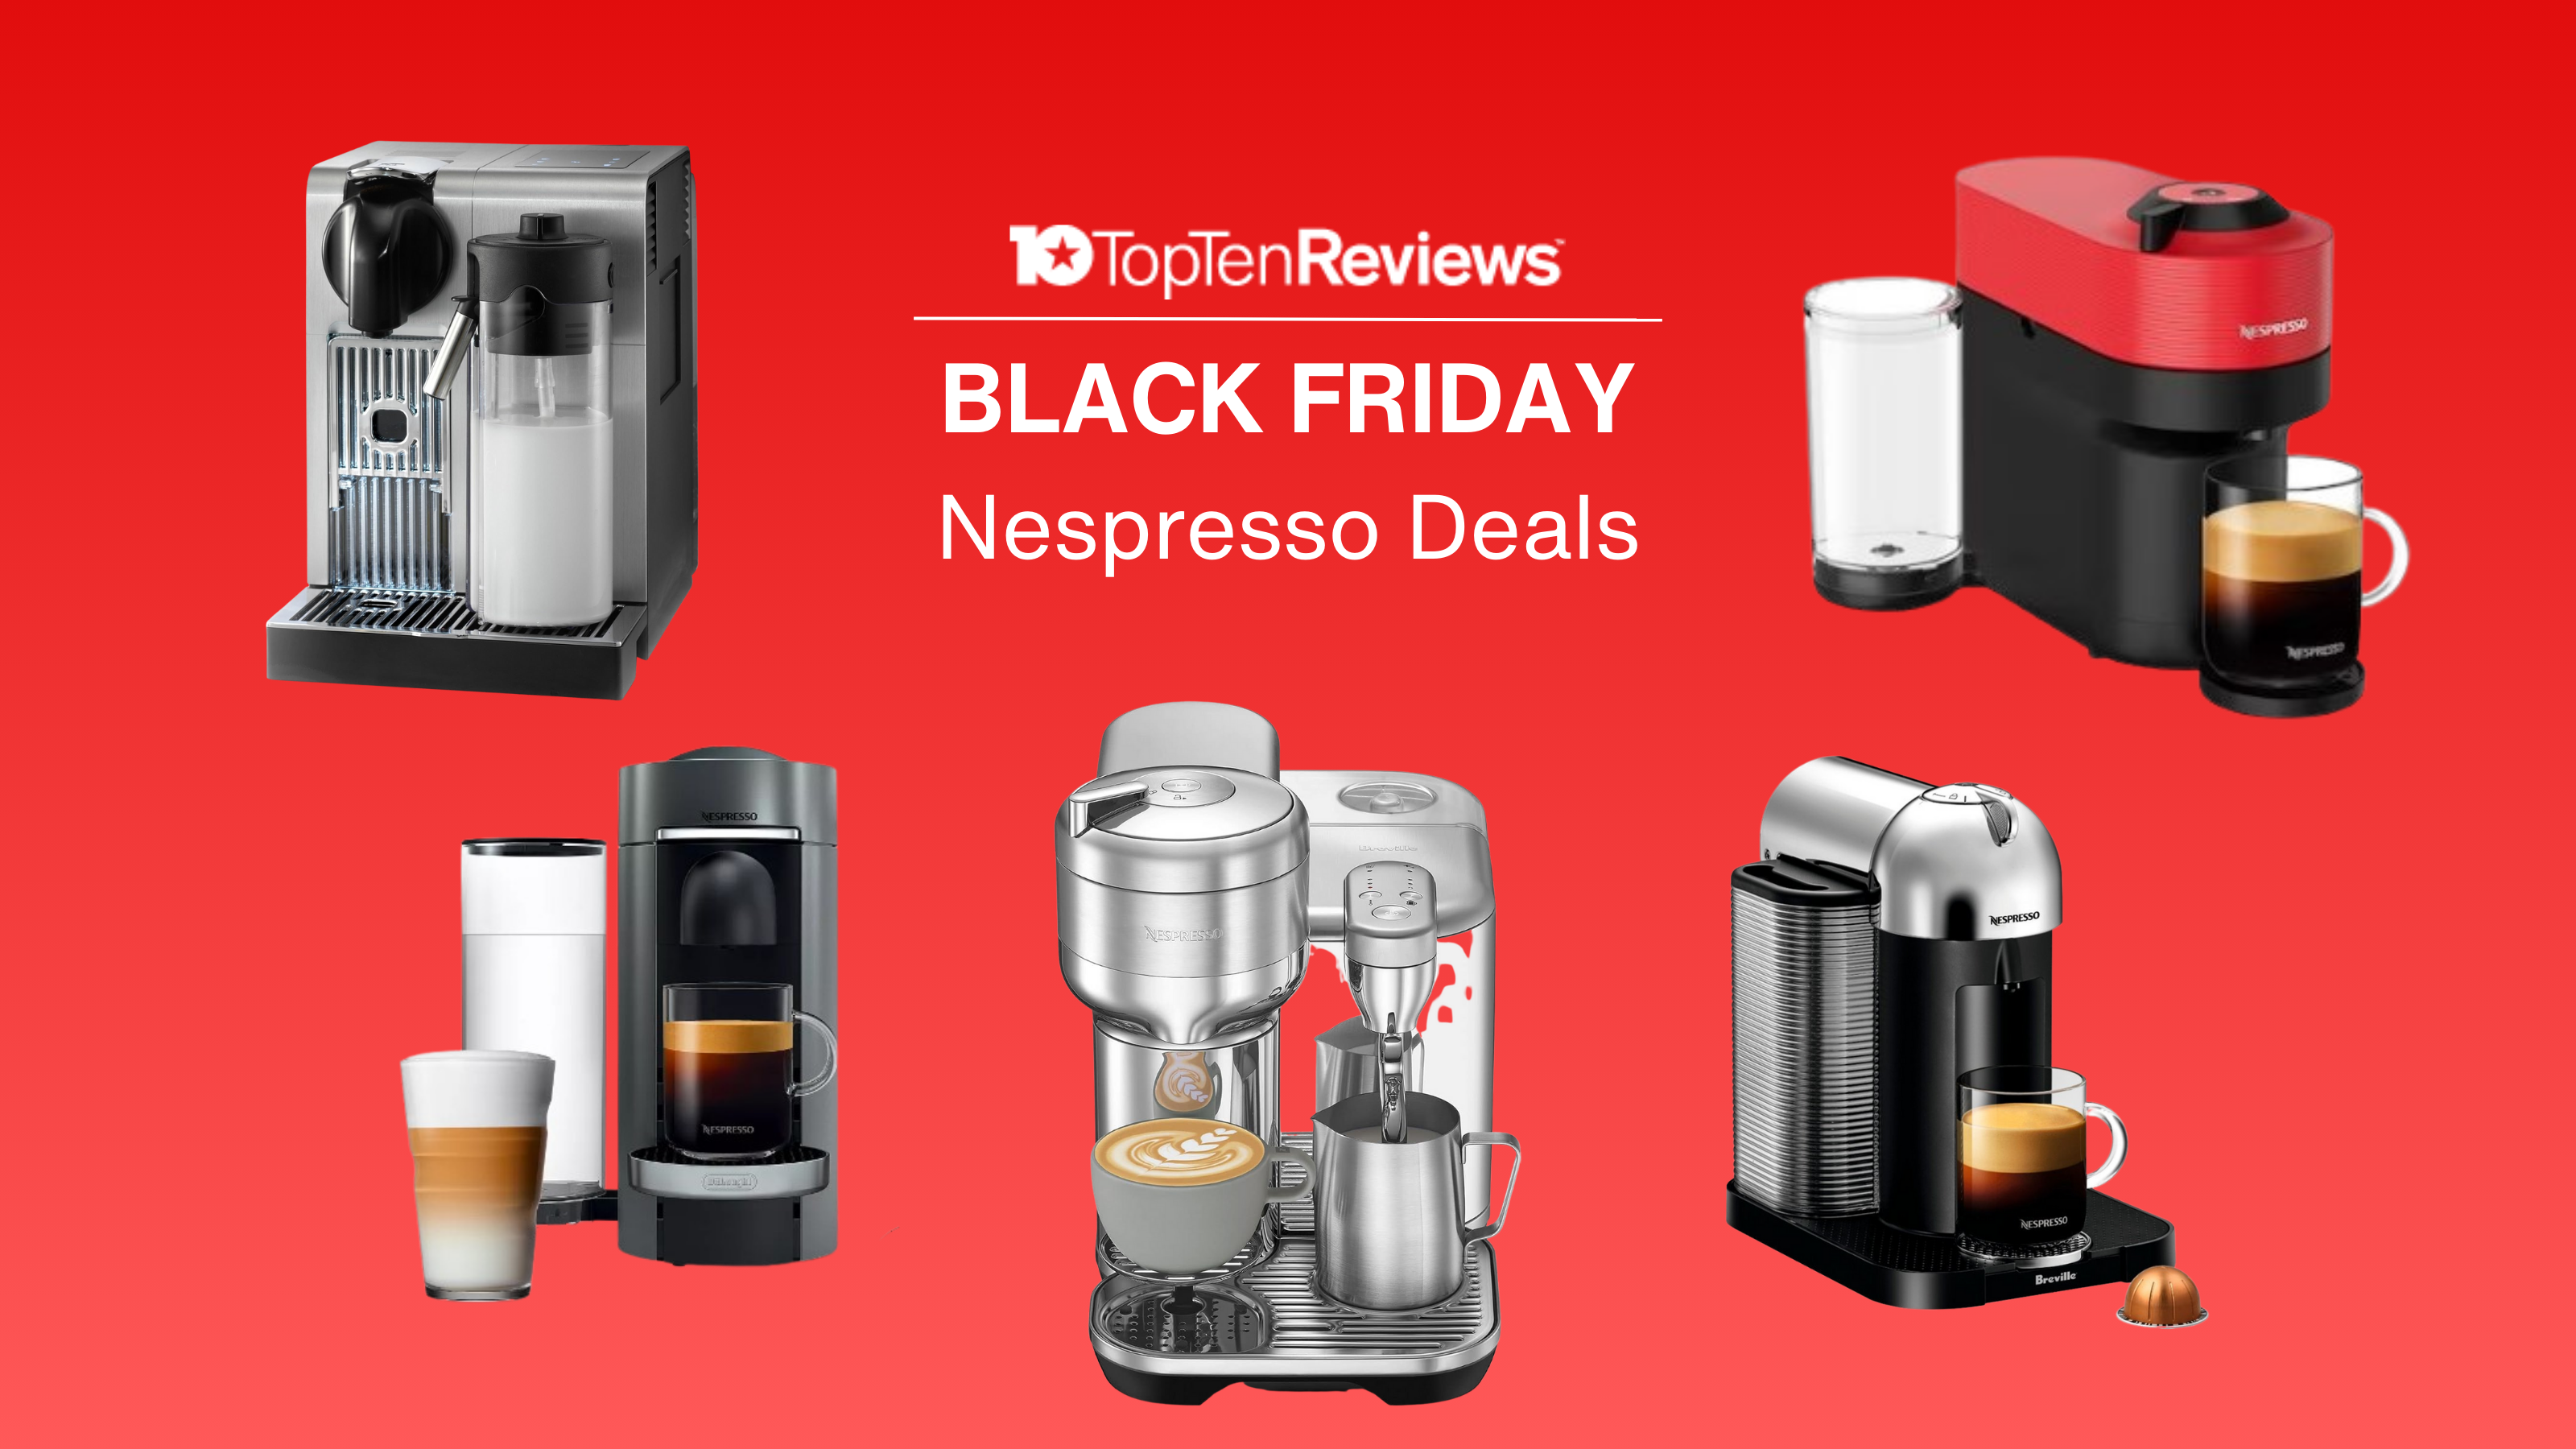 My 5 top Nespresso deals available for Black Friday